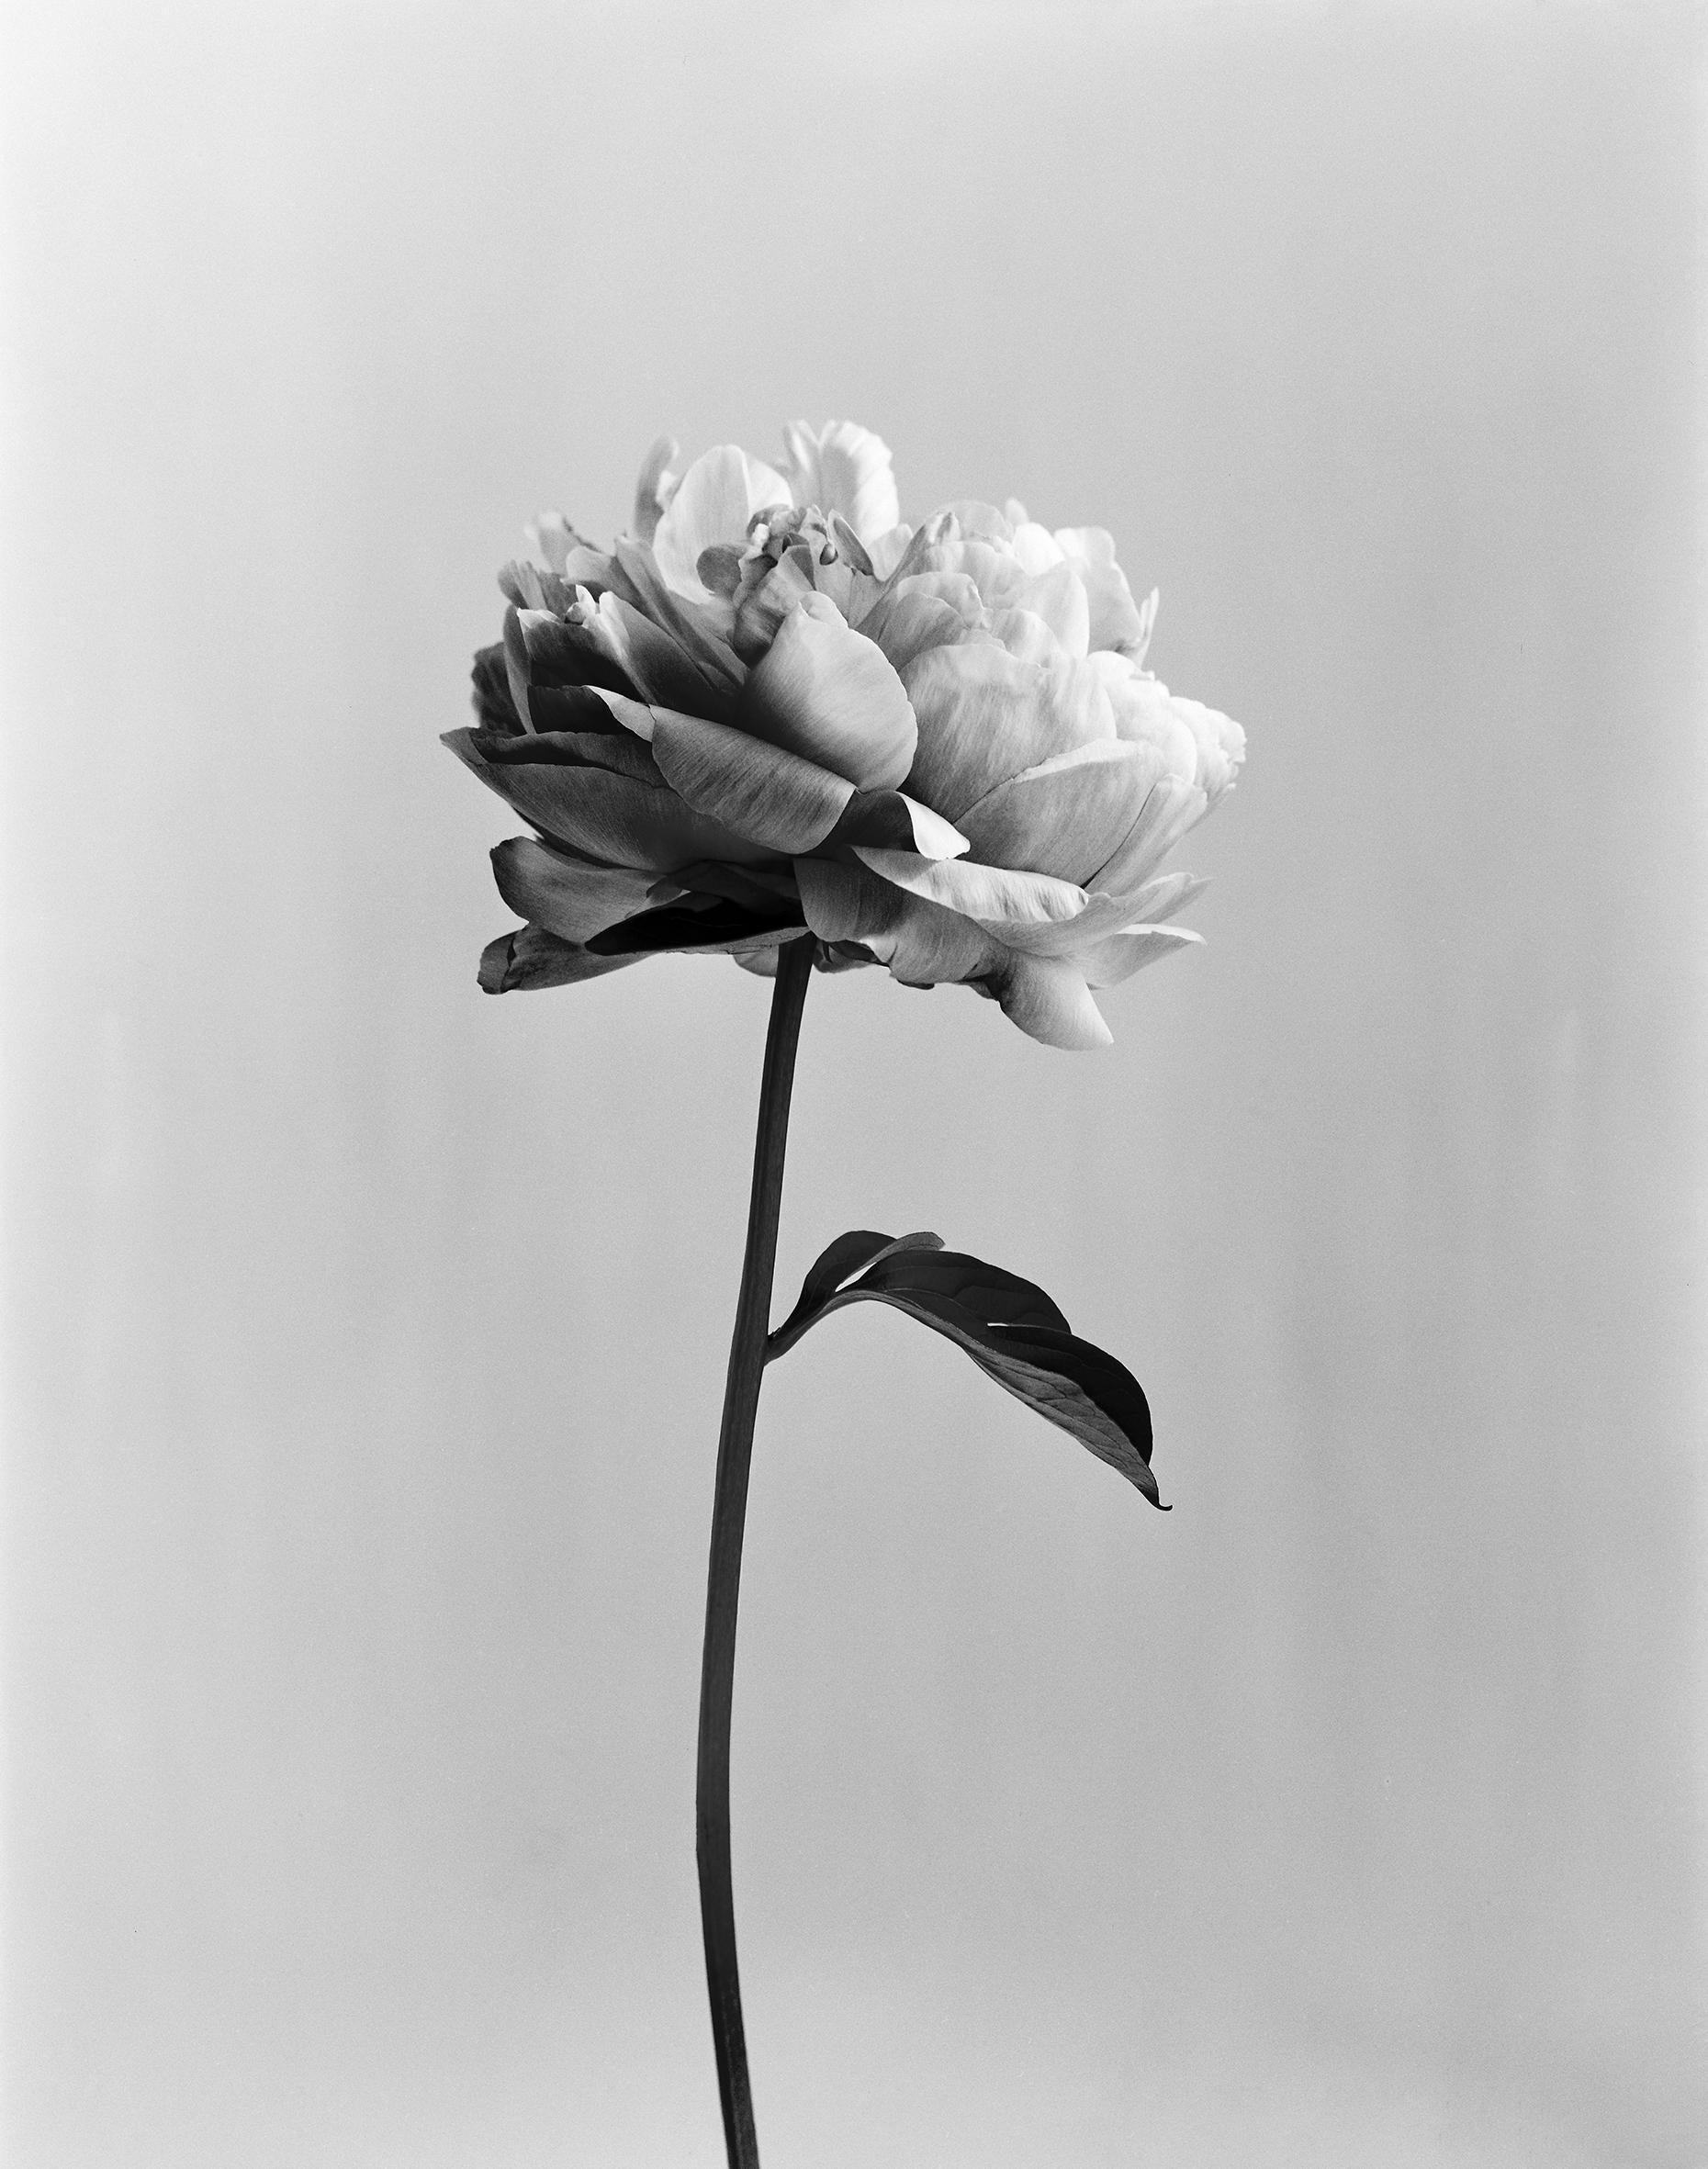 Ugne Pouwell Still-Life Photograph - Peony no.3 - analogue black and white floral photography, limited edition of 15